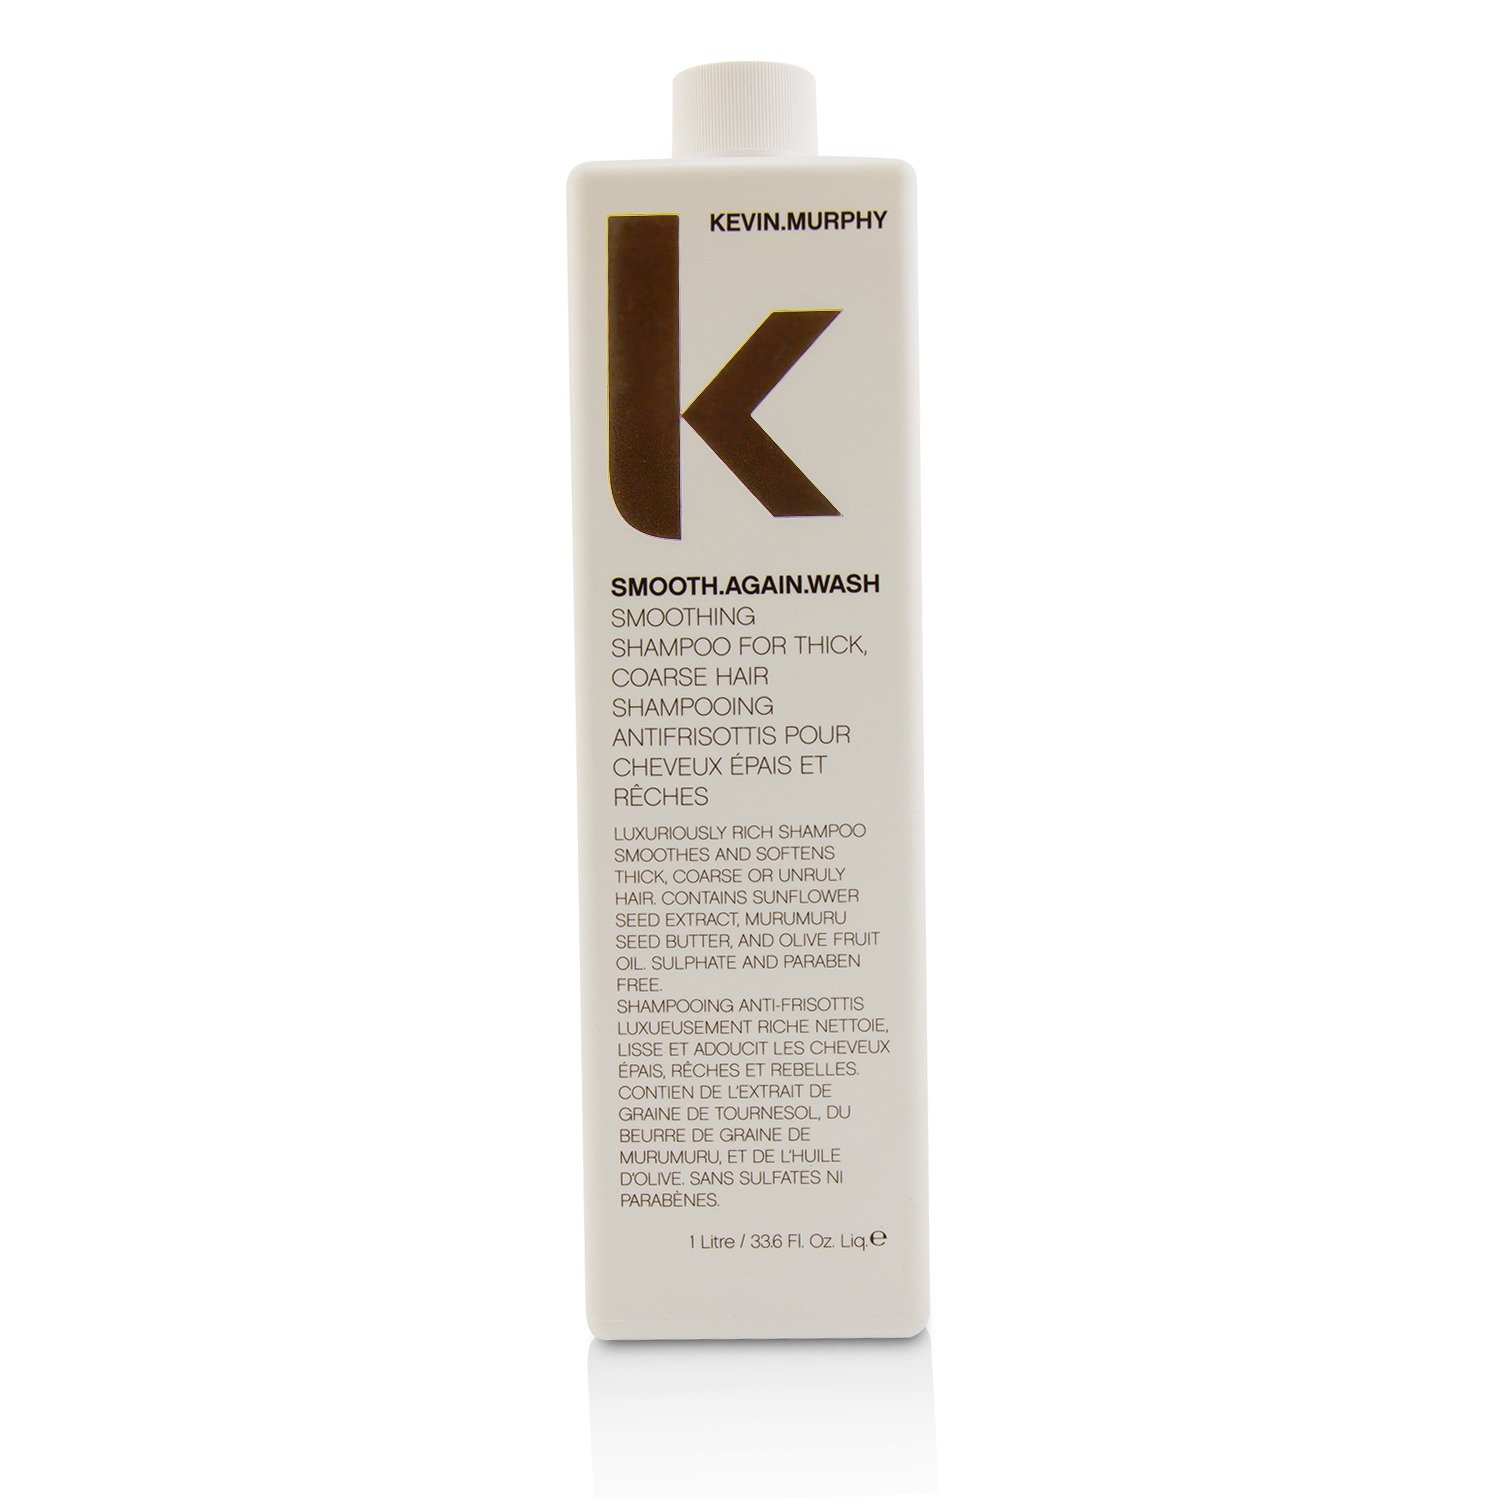 Smooth.Again.Wash (Smoothing Shampoo - For Thick Coarse Hair) Kevin.Murphy Image